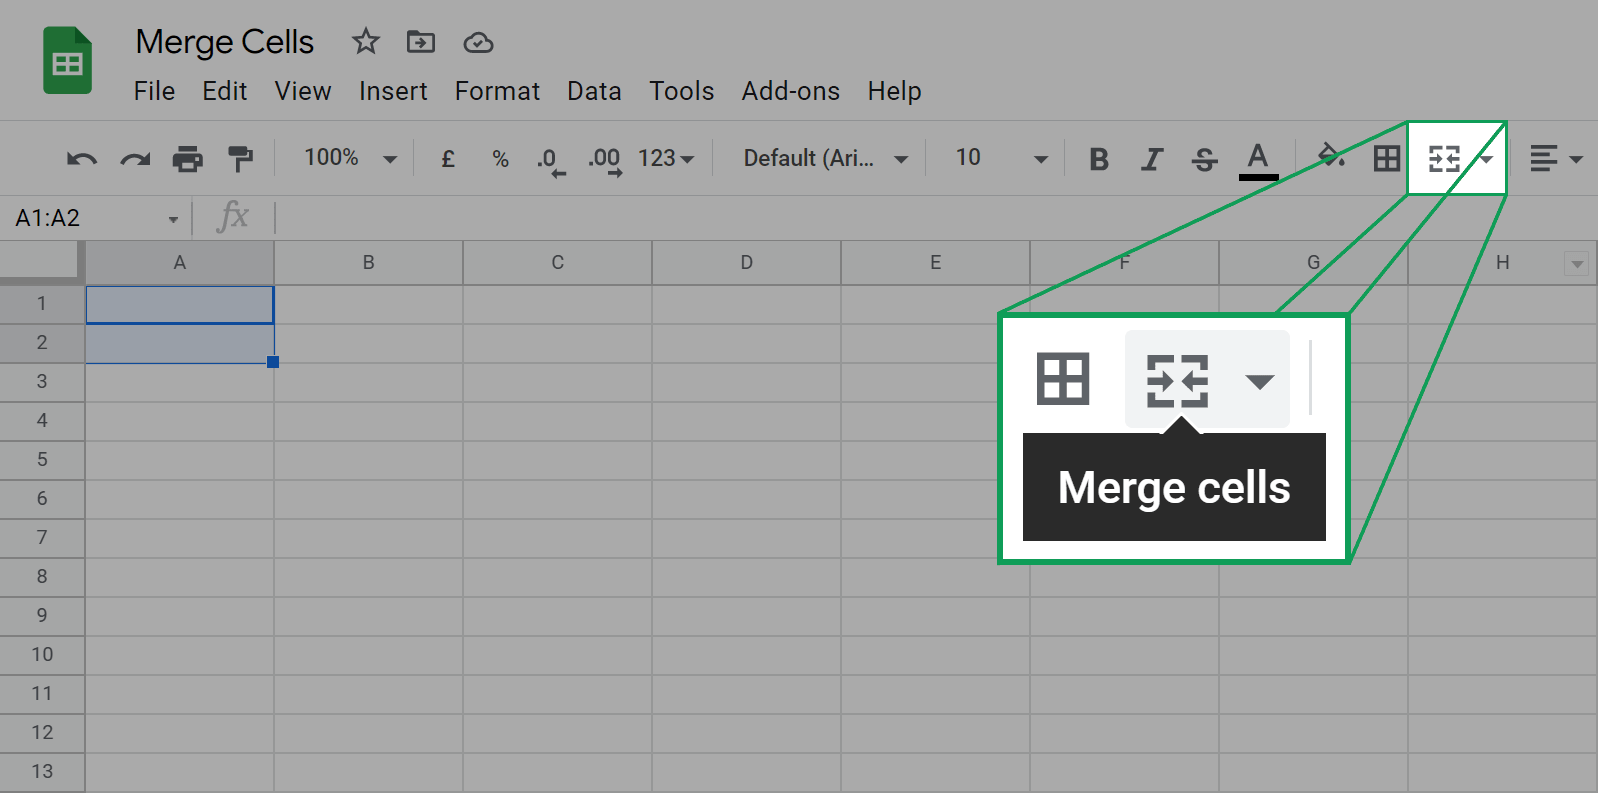 close up image of what the merge cells icon looks like in the google sheets toolbar